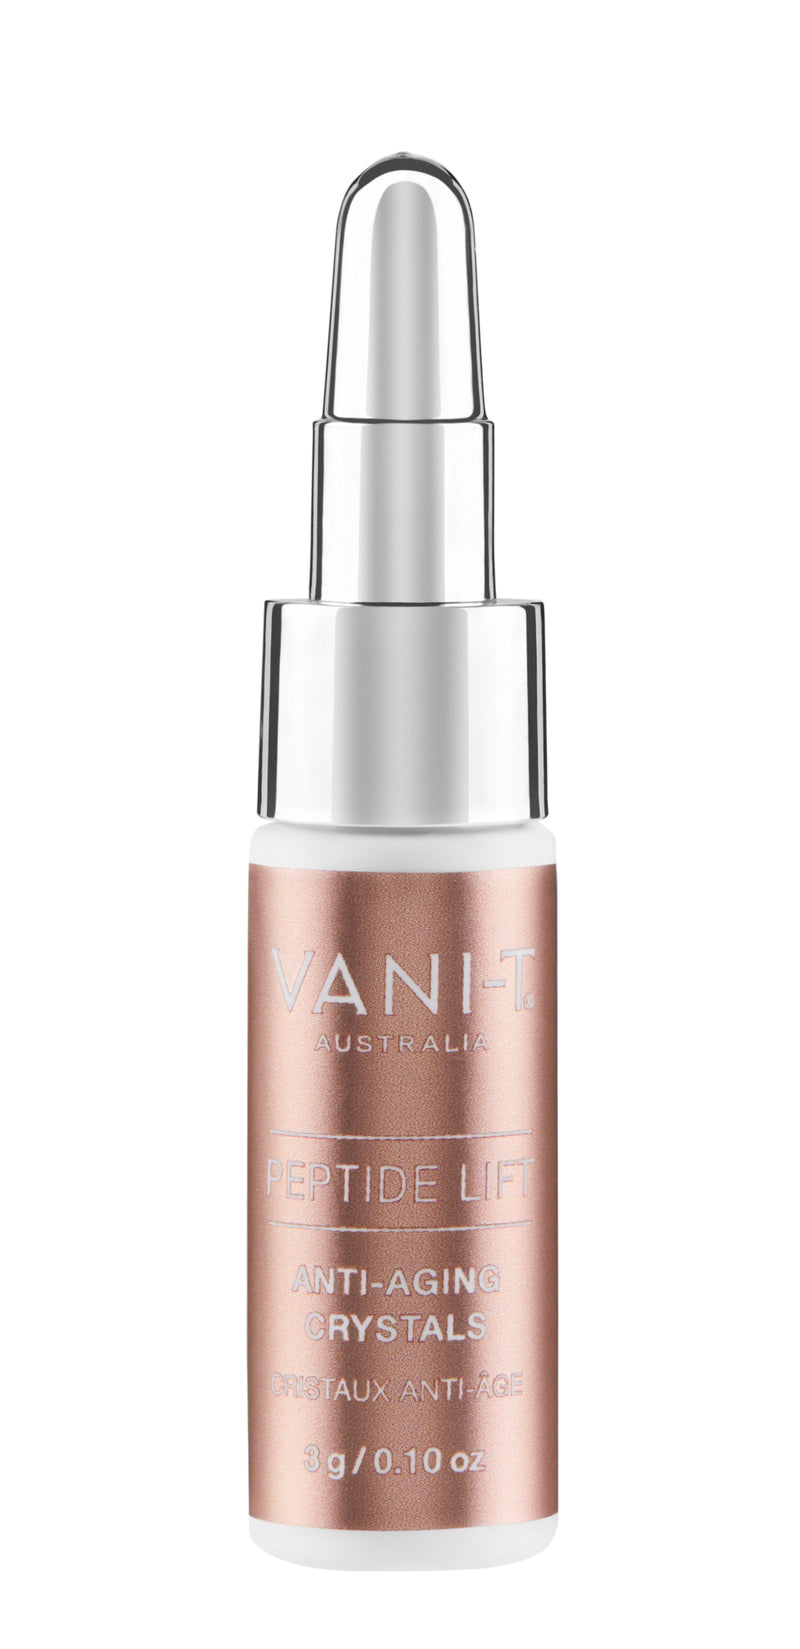 Peptide Lift - Anti-Aging Crystals